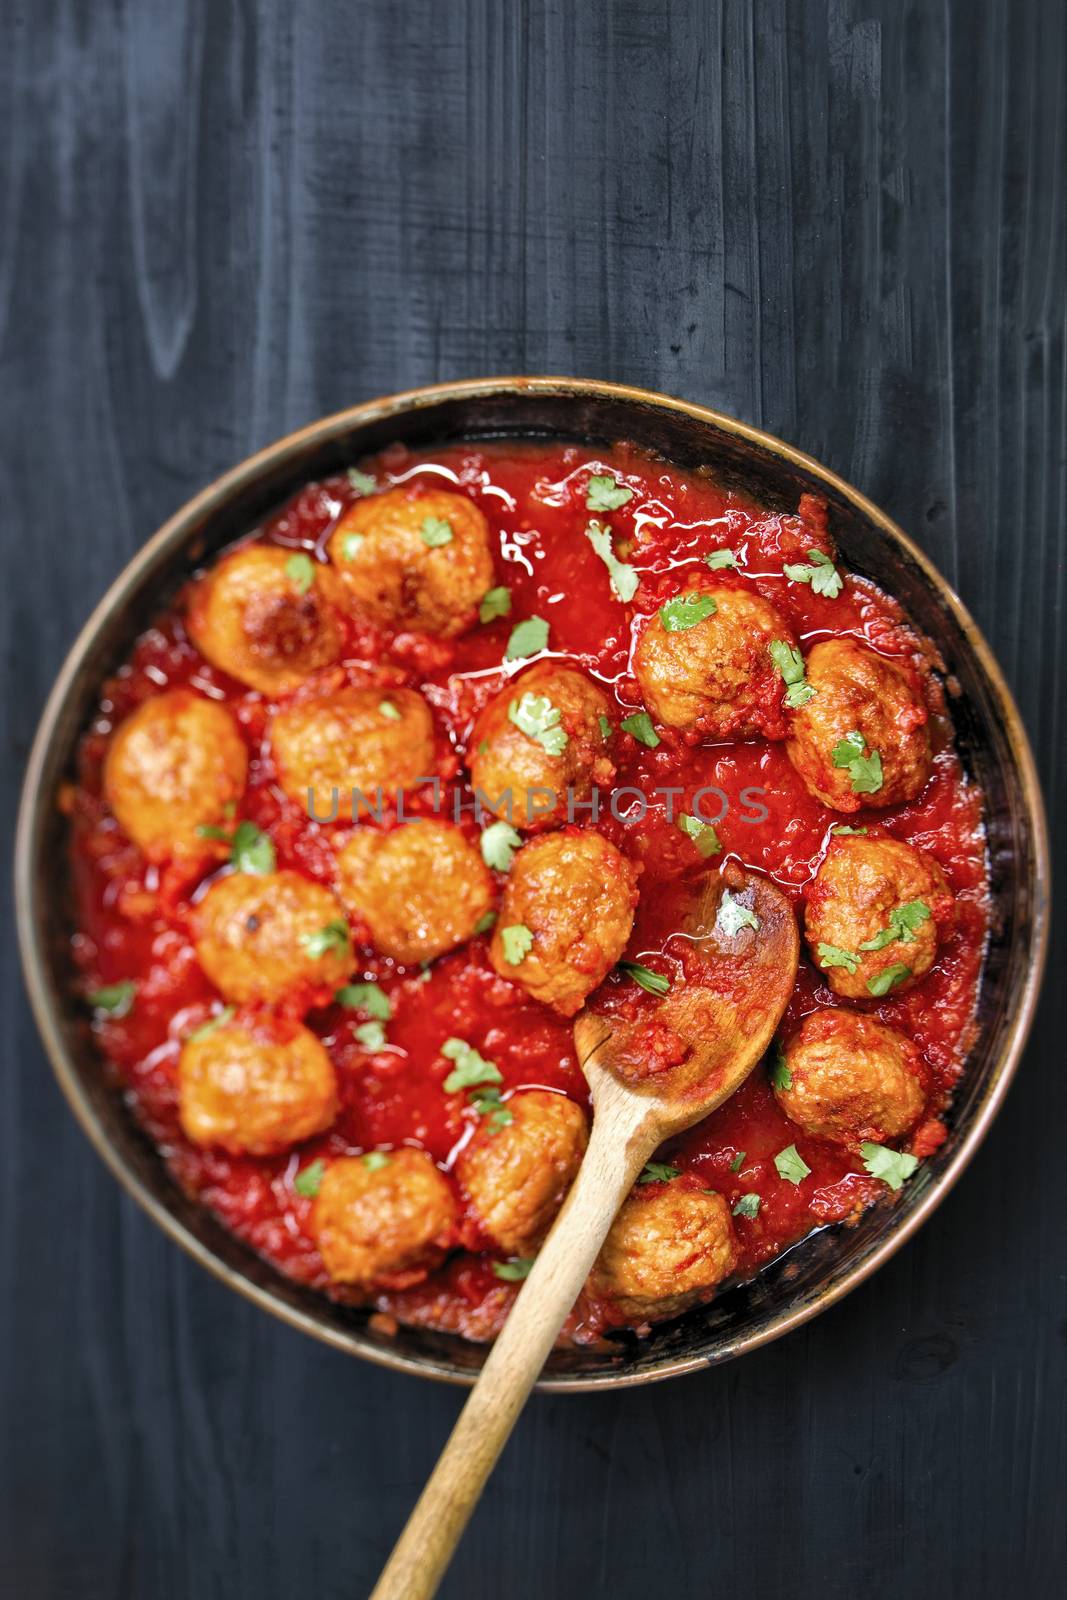 rustic italian meatball in tomato sauce by zkruger